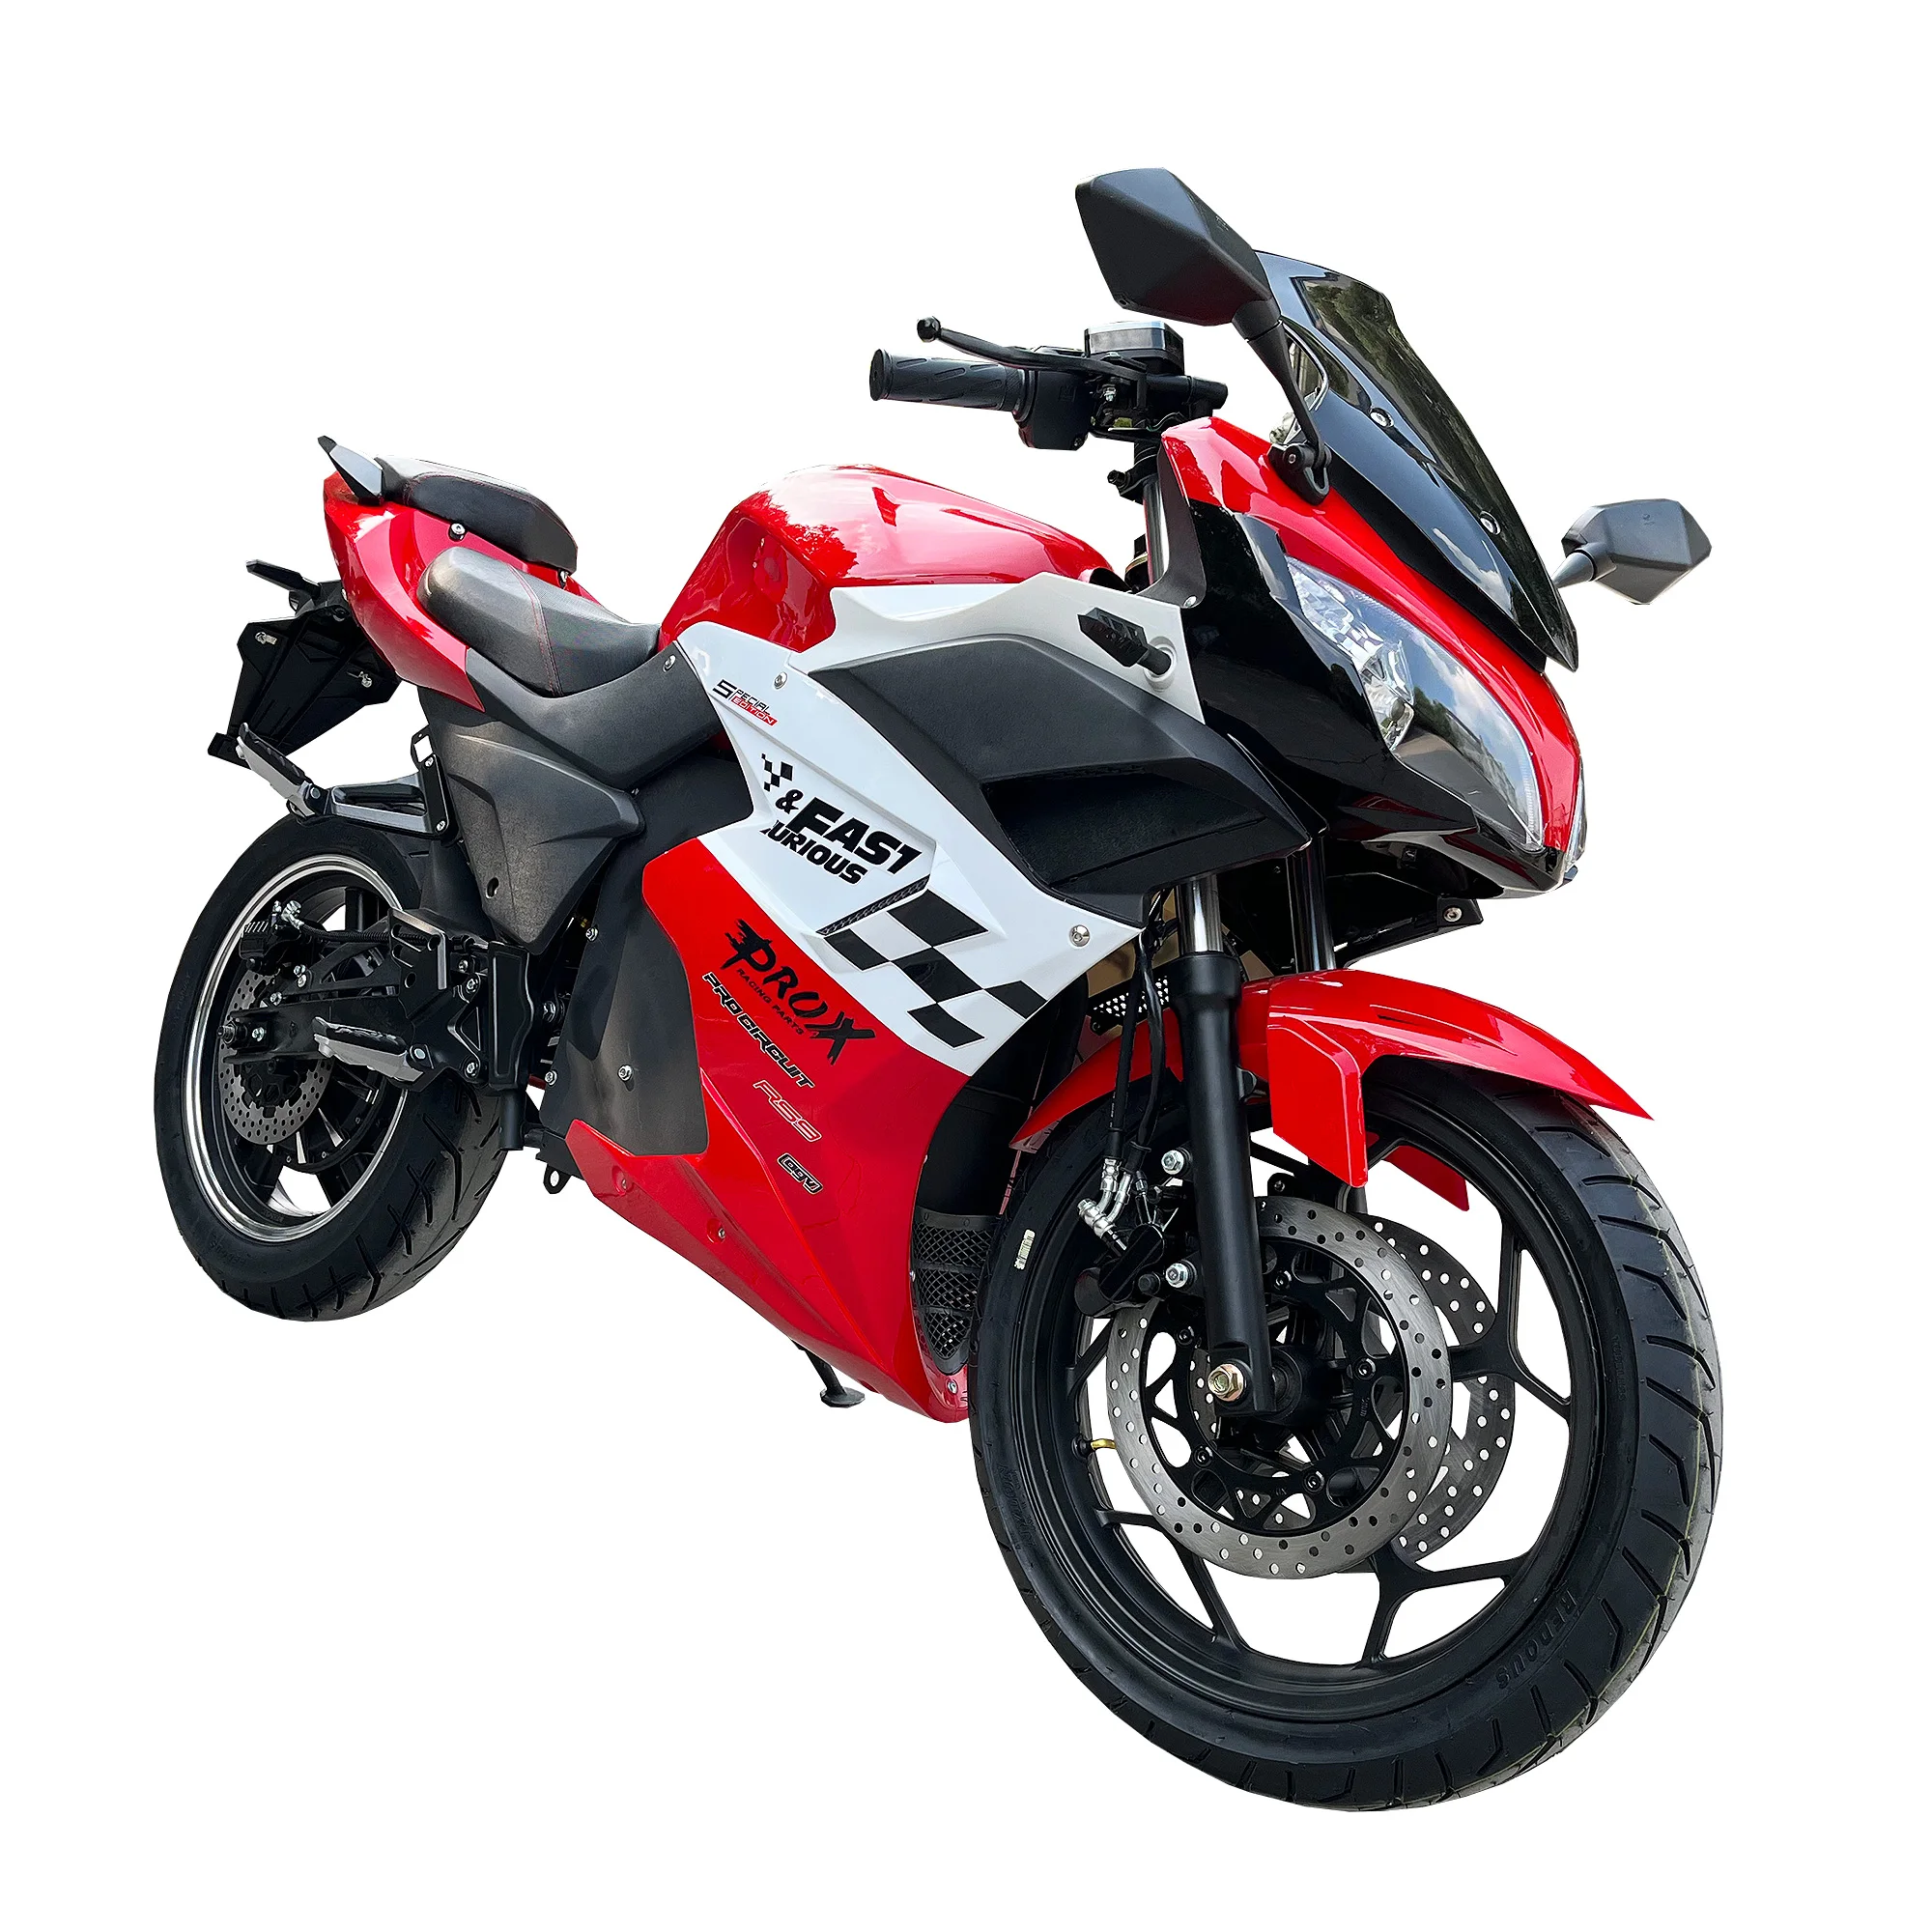 Speed motorbike 120km/h 10000w hub motor electric motorcycle with factory price